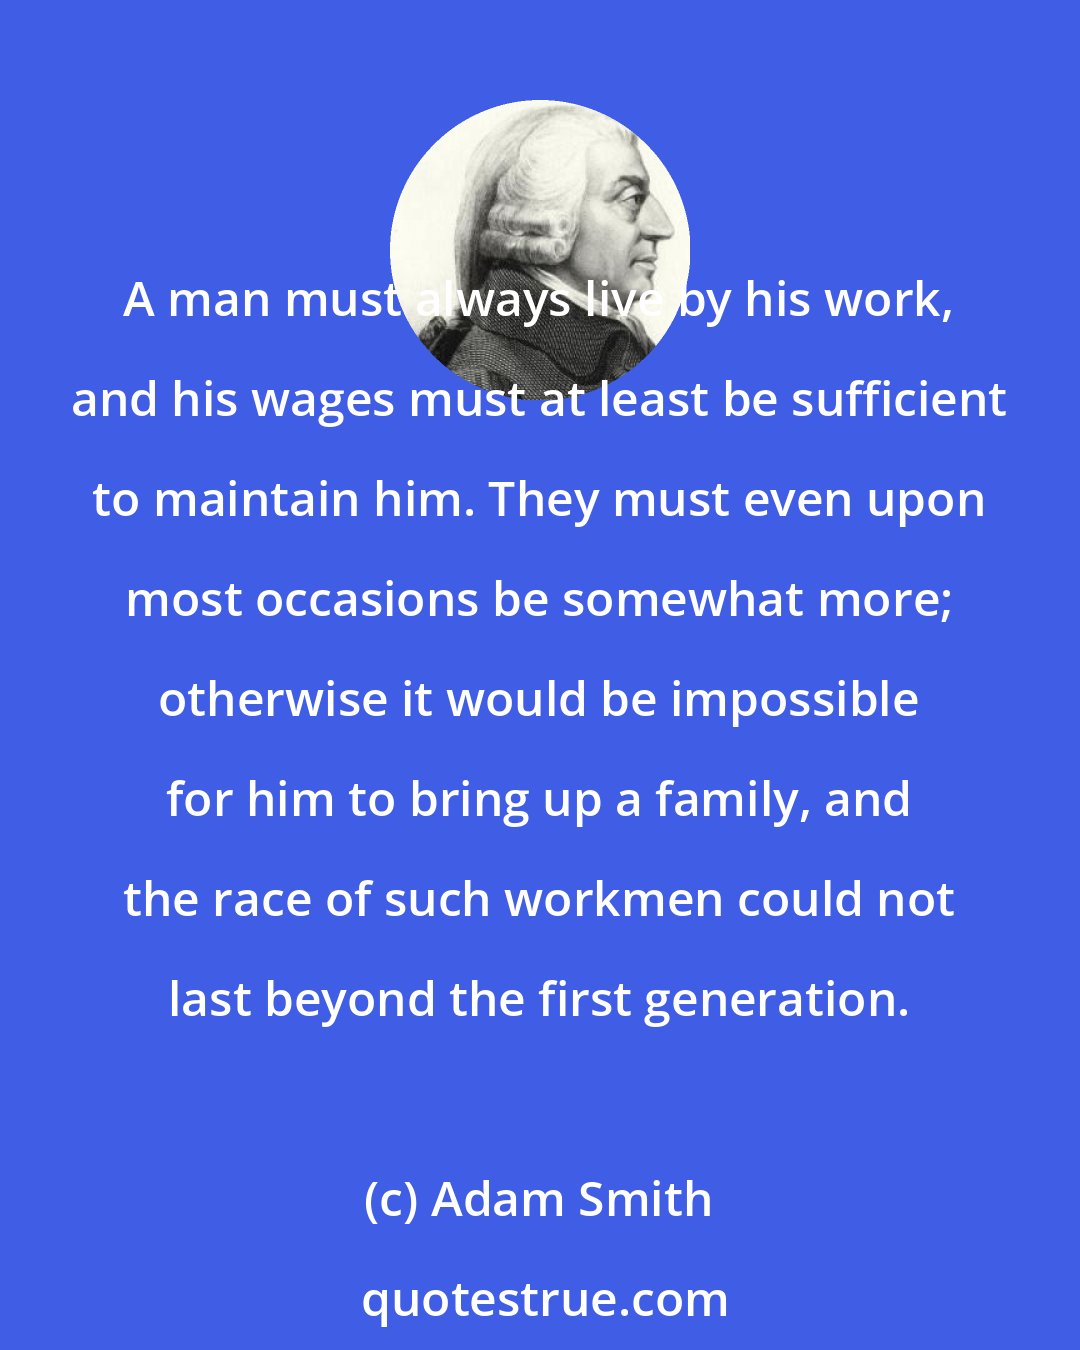 Adam Smith: A man must always live by his work, and his wages must at least be sufficient to maintain him. They must even upon most occasions be somewhat more; otherwise it would be impossible for him to bring up a family, and the race of such workmen could not last beyond the first generation.